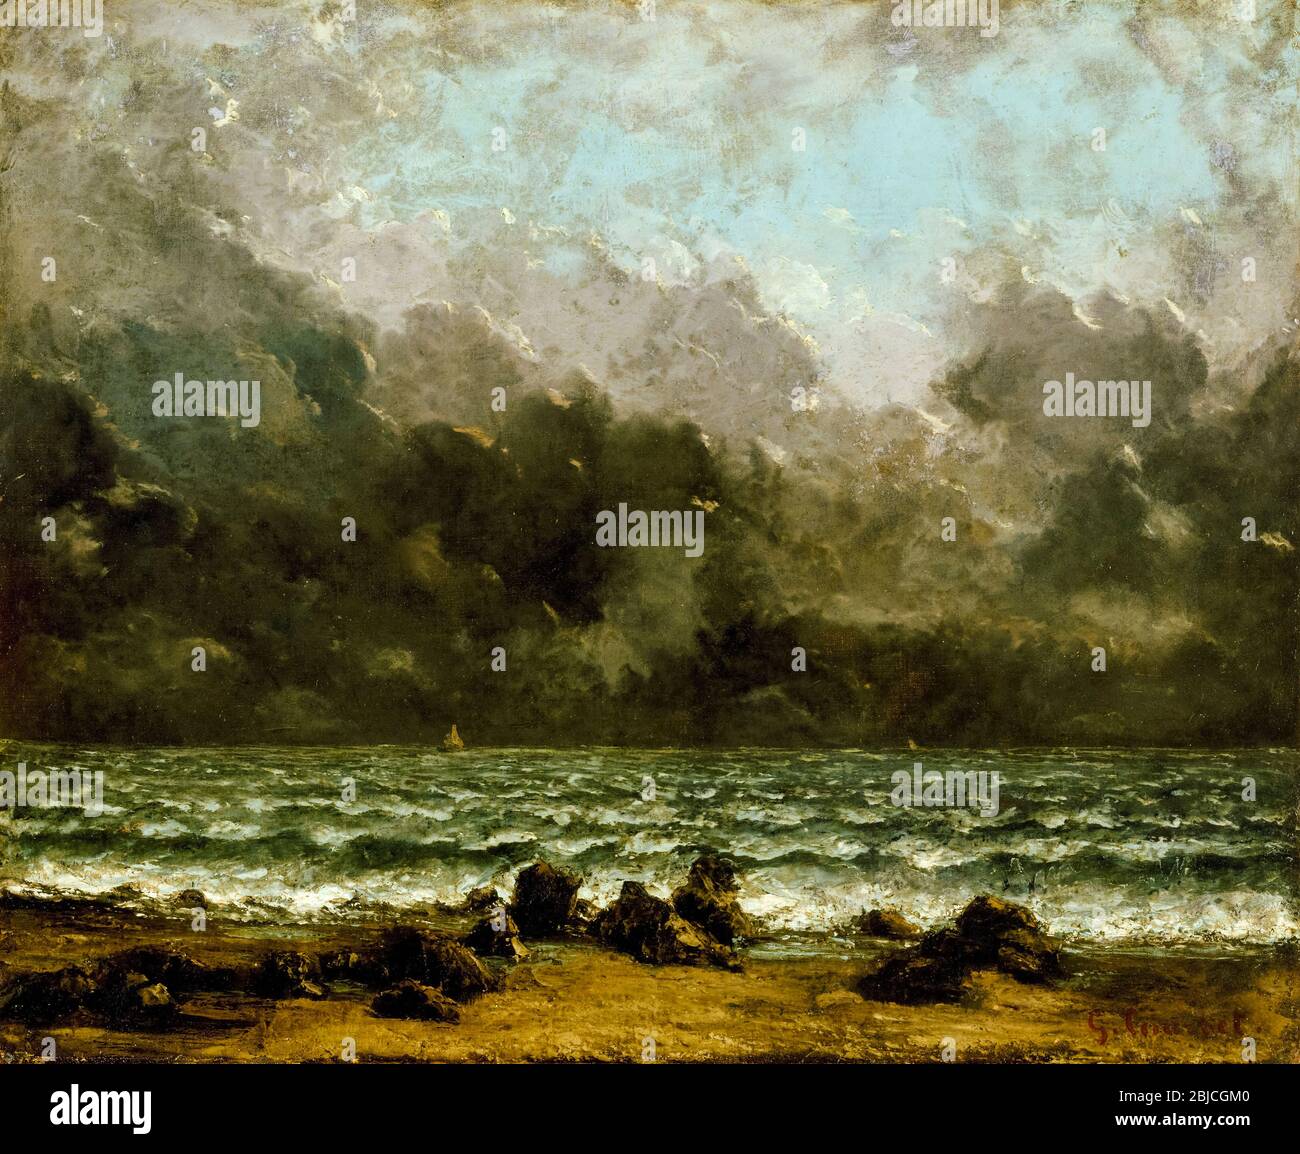 Gustave Courbet, The Sea, landscape painting, after 1865 Stock Photo